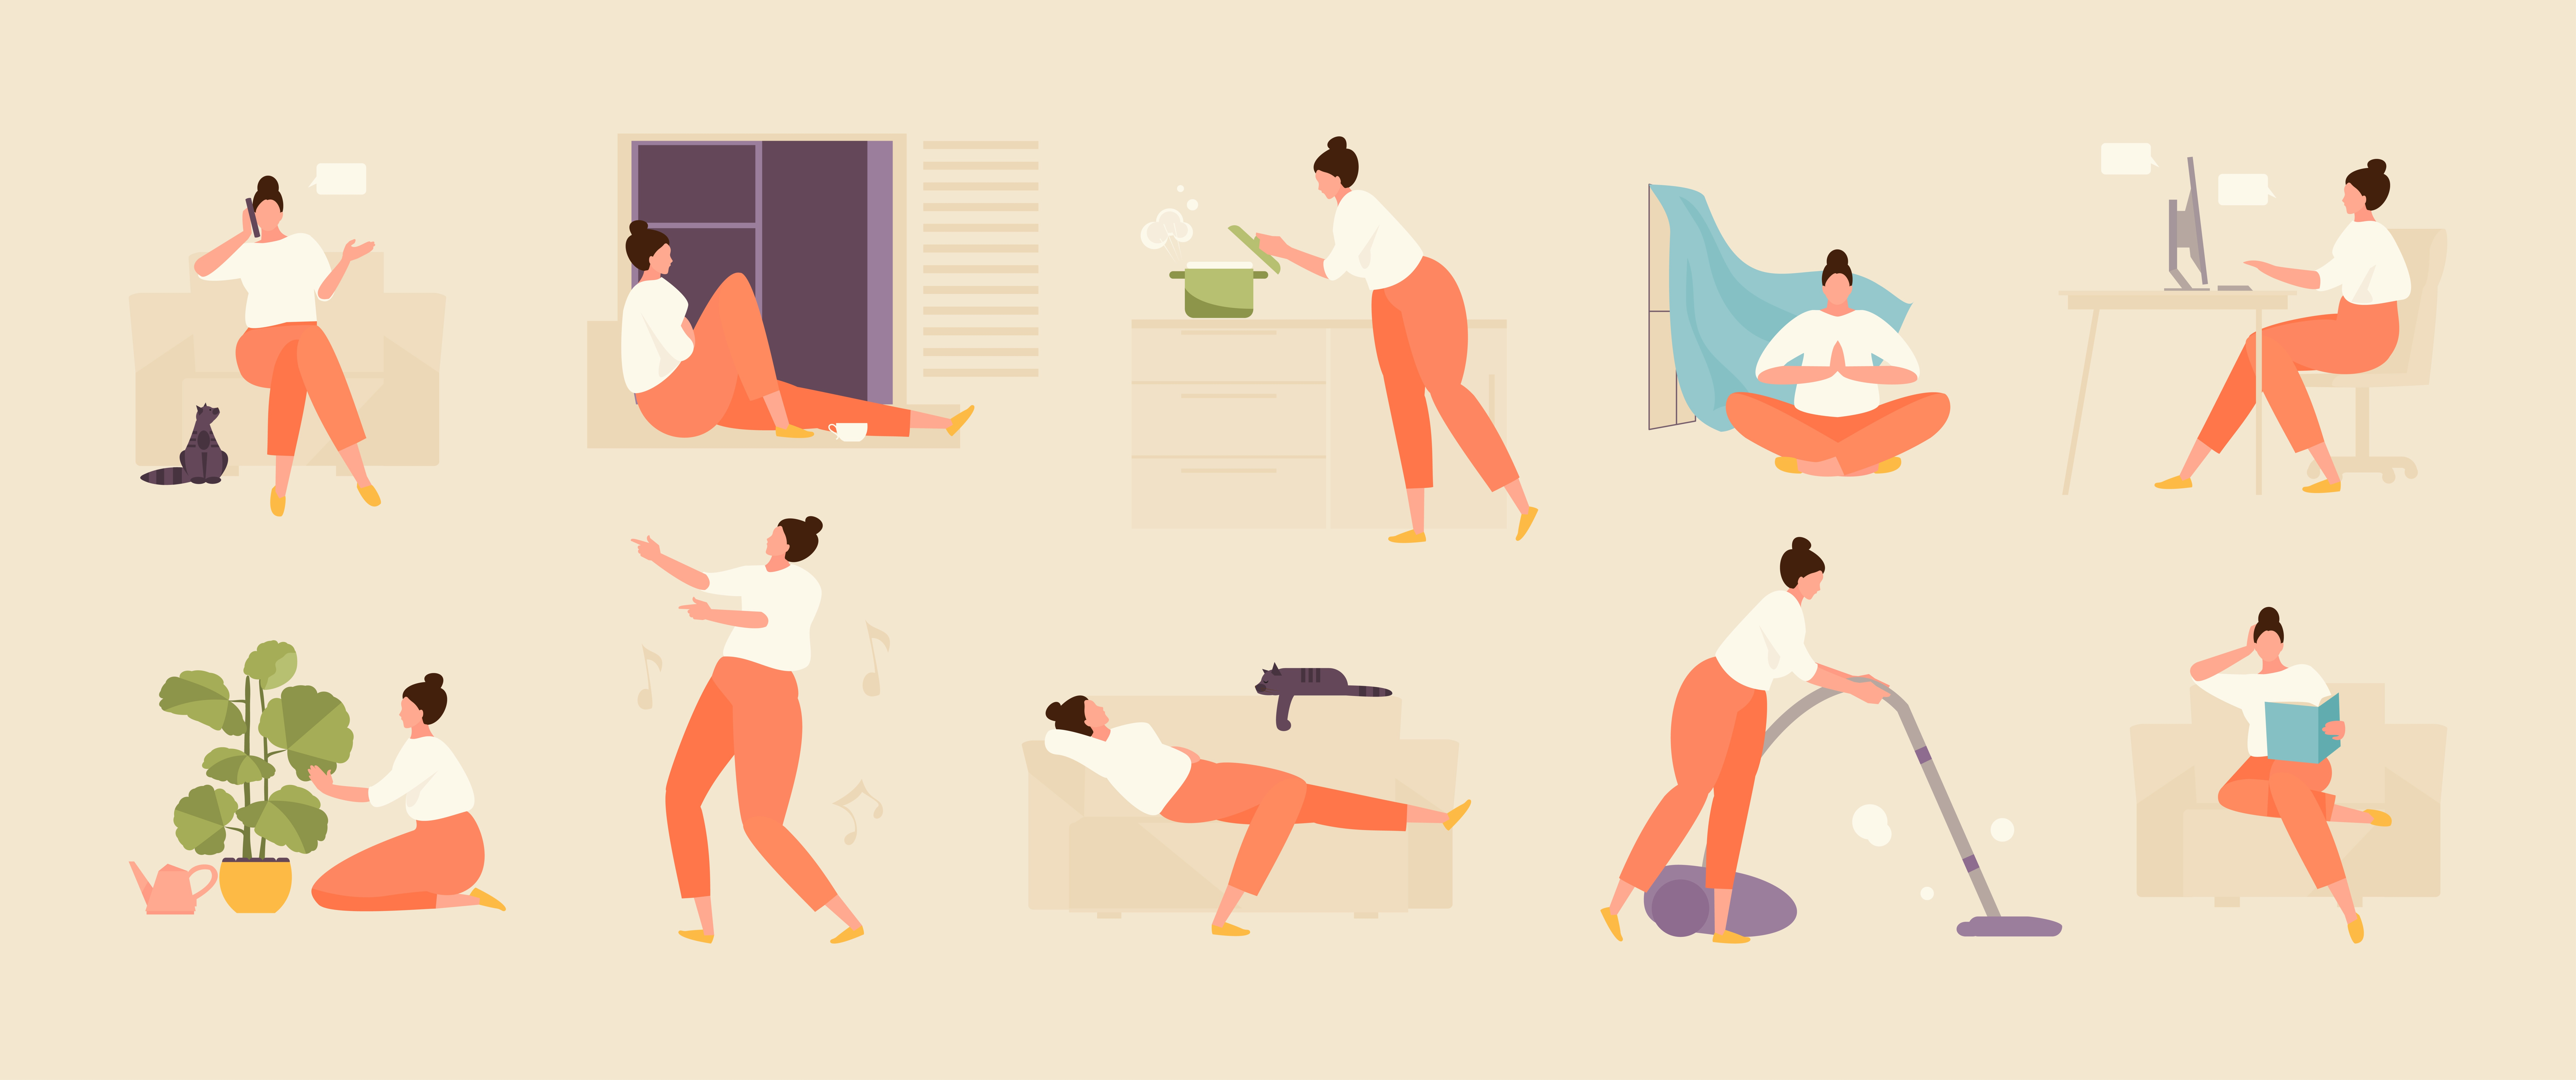 a woman's daily routine illustration 